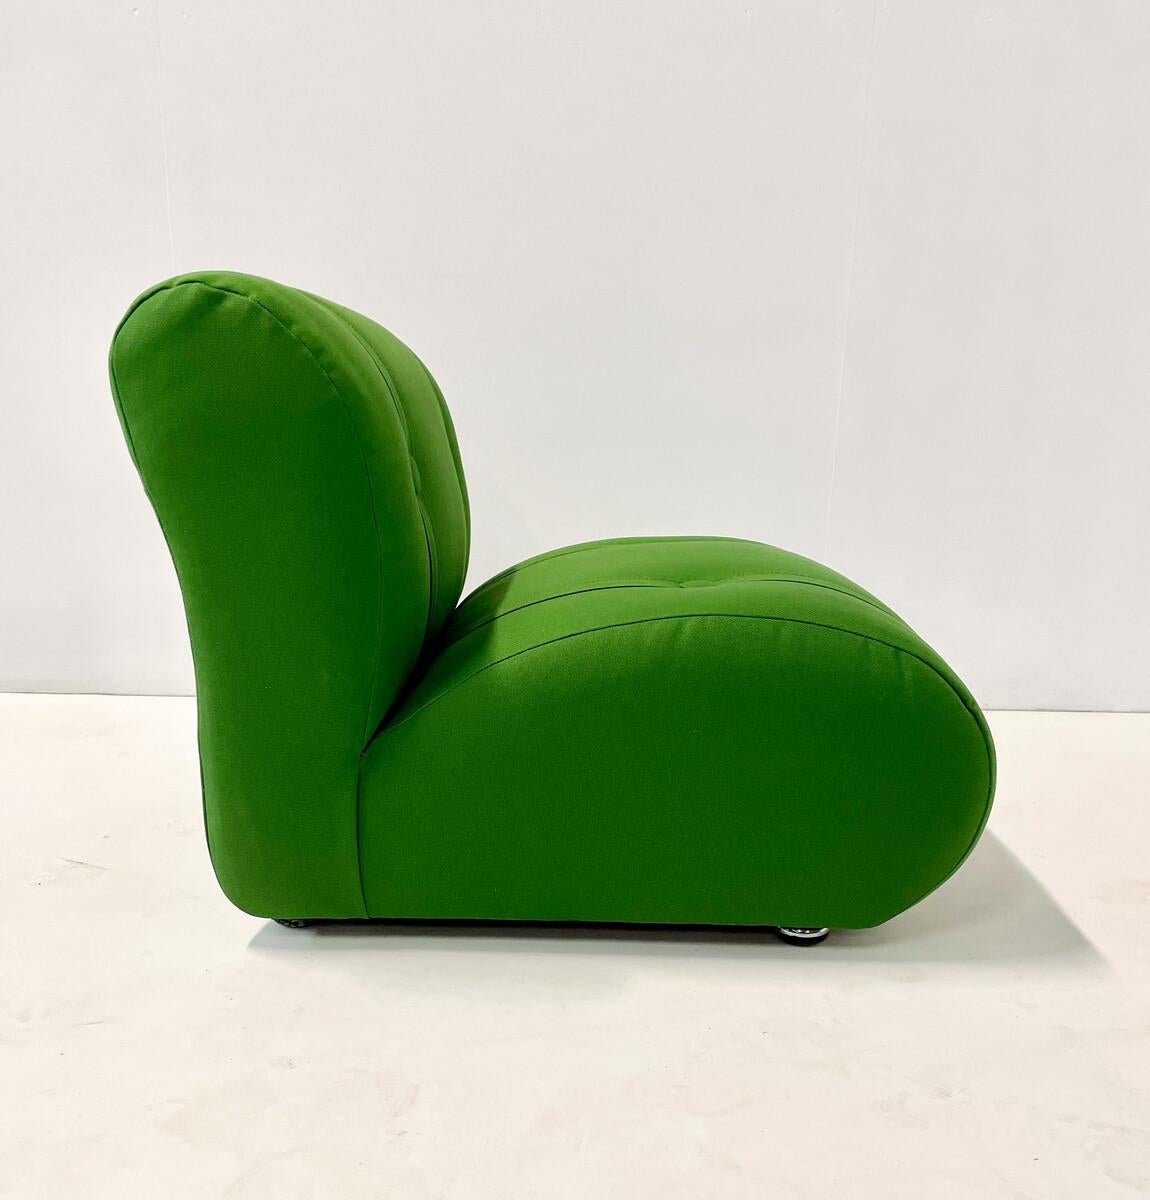 Mid-Century Modern green modular sofa by Doimo Salotti, Italy, 1970s - New Upholstery.
Each element is sold individually.
